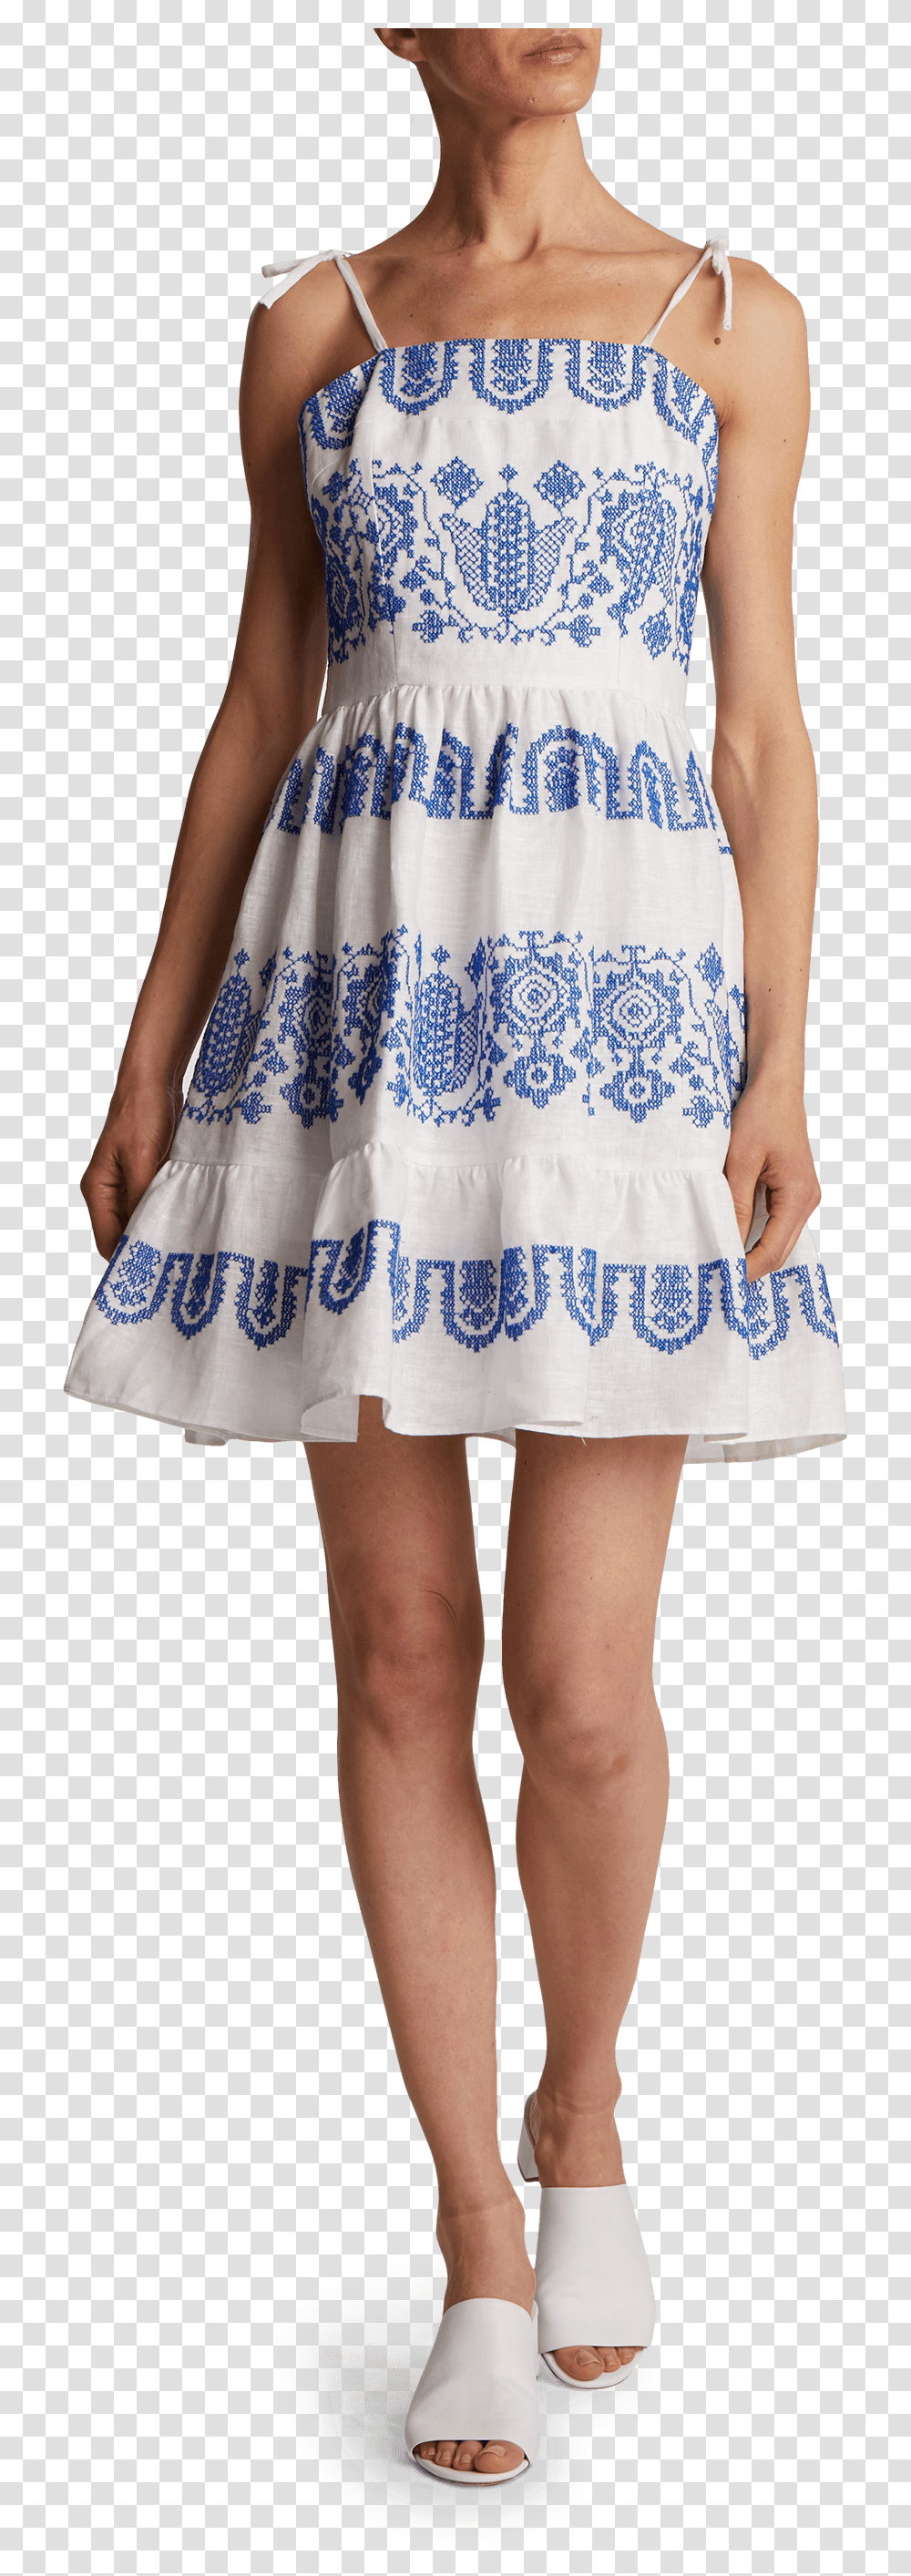 Item Primary Image Cocktail Dress, Apparel, Skirt, Person Transparent Png